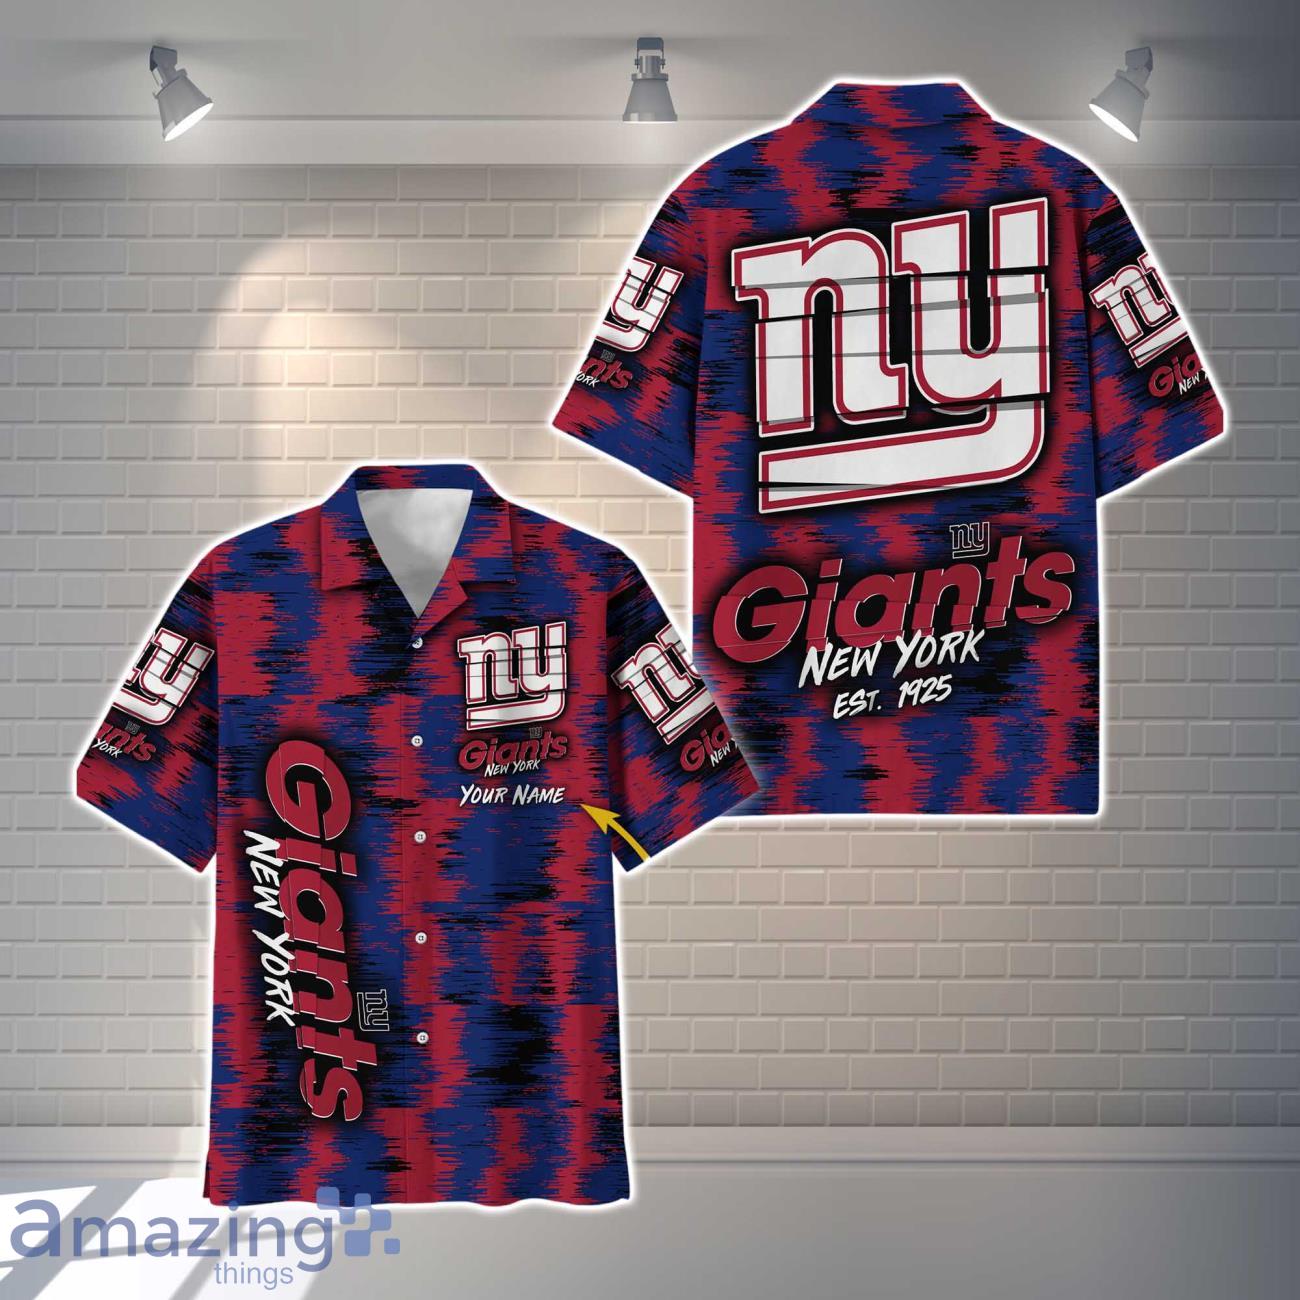 New York Giants Custom Name NFL Floral Hawaiian Shirt And Shorts Gift For  Men And Women Fans - Banantees